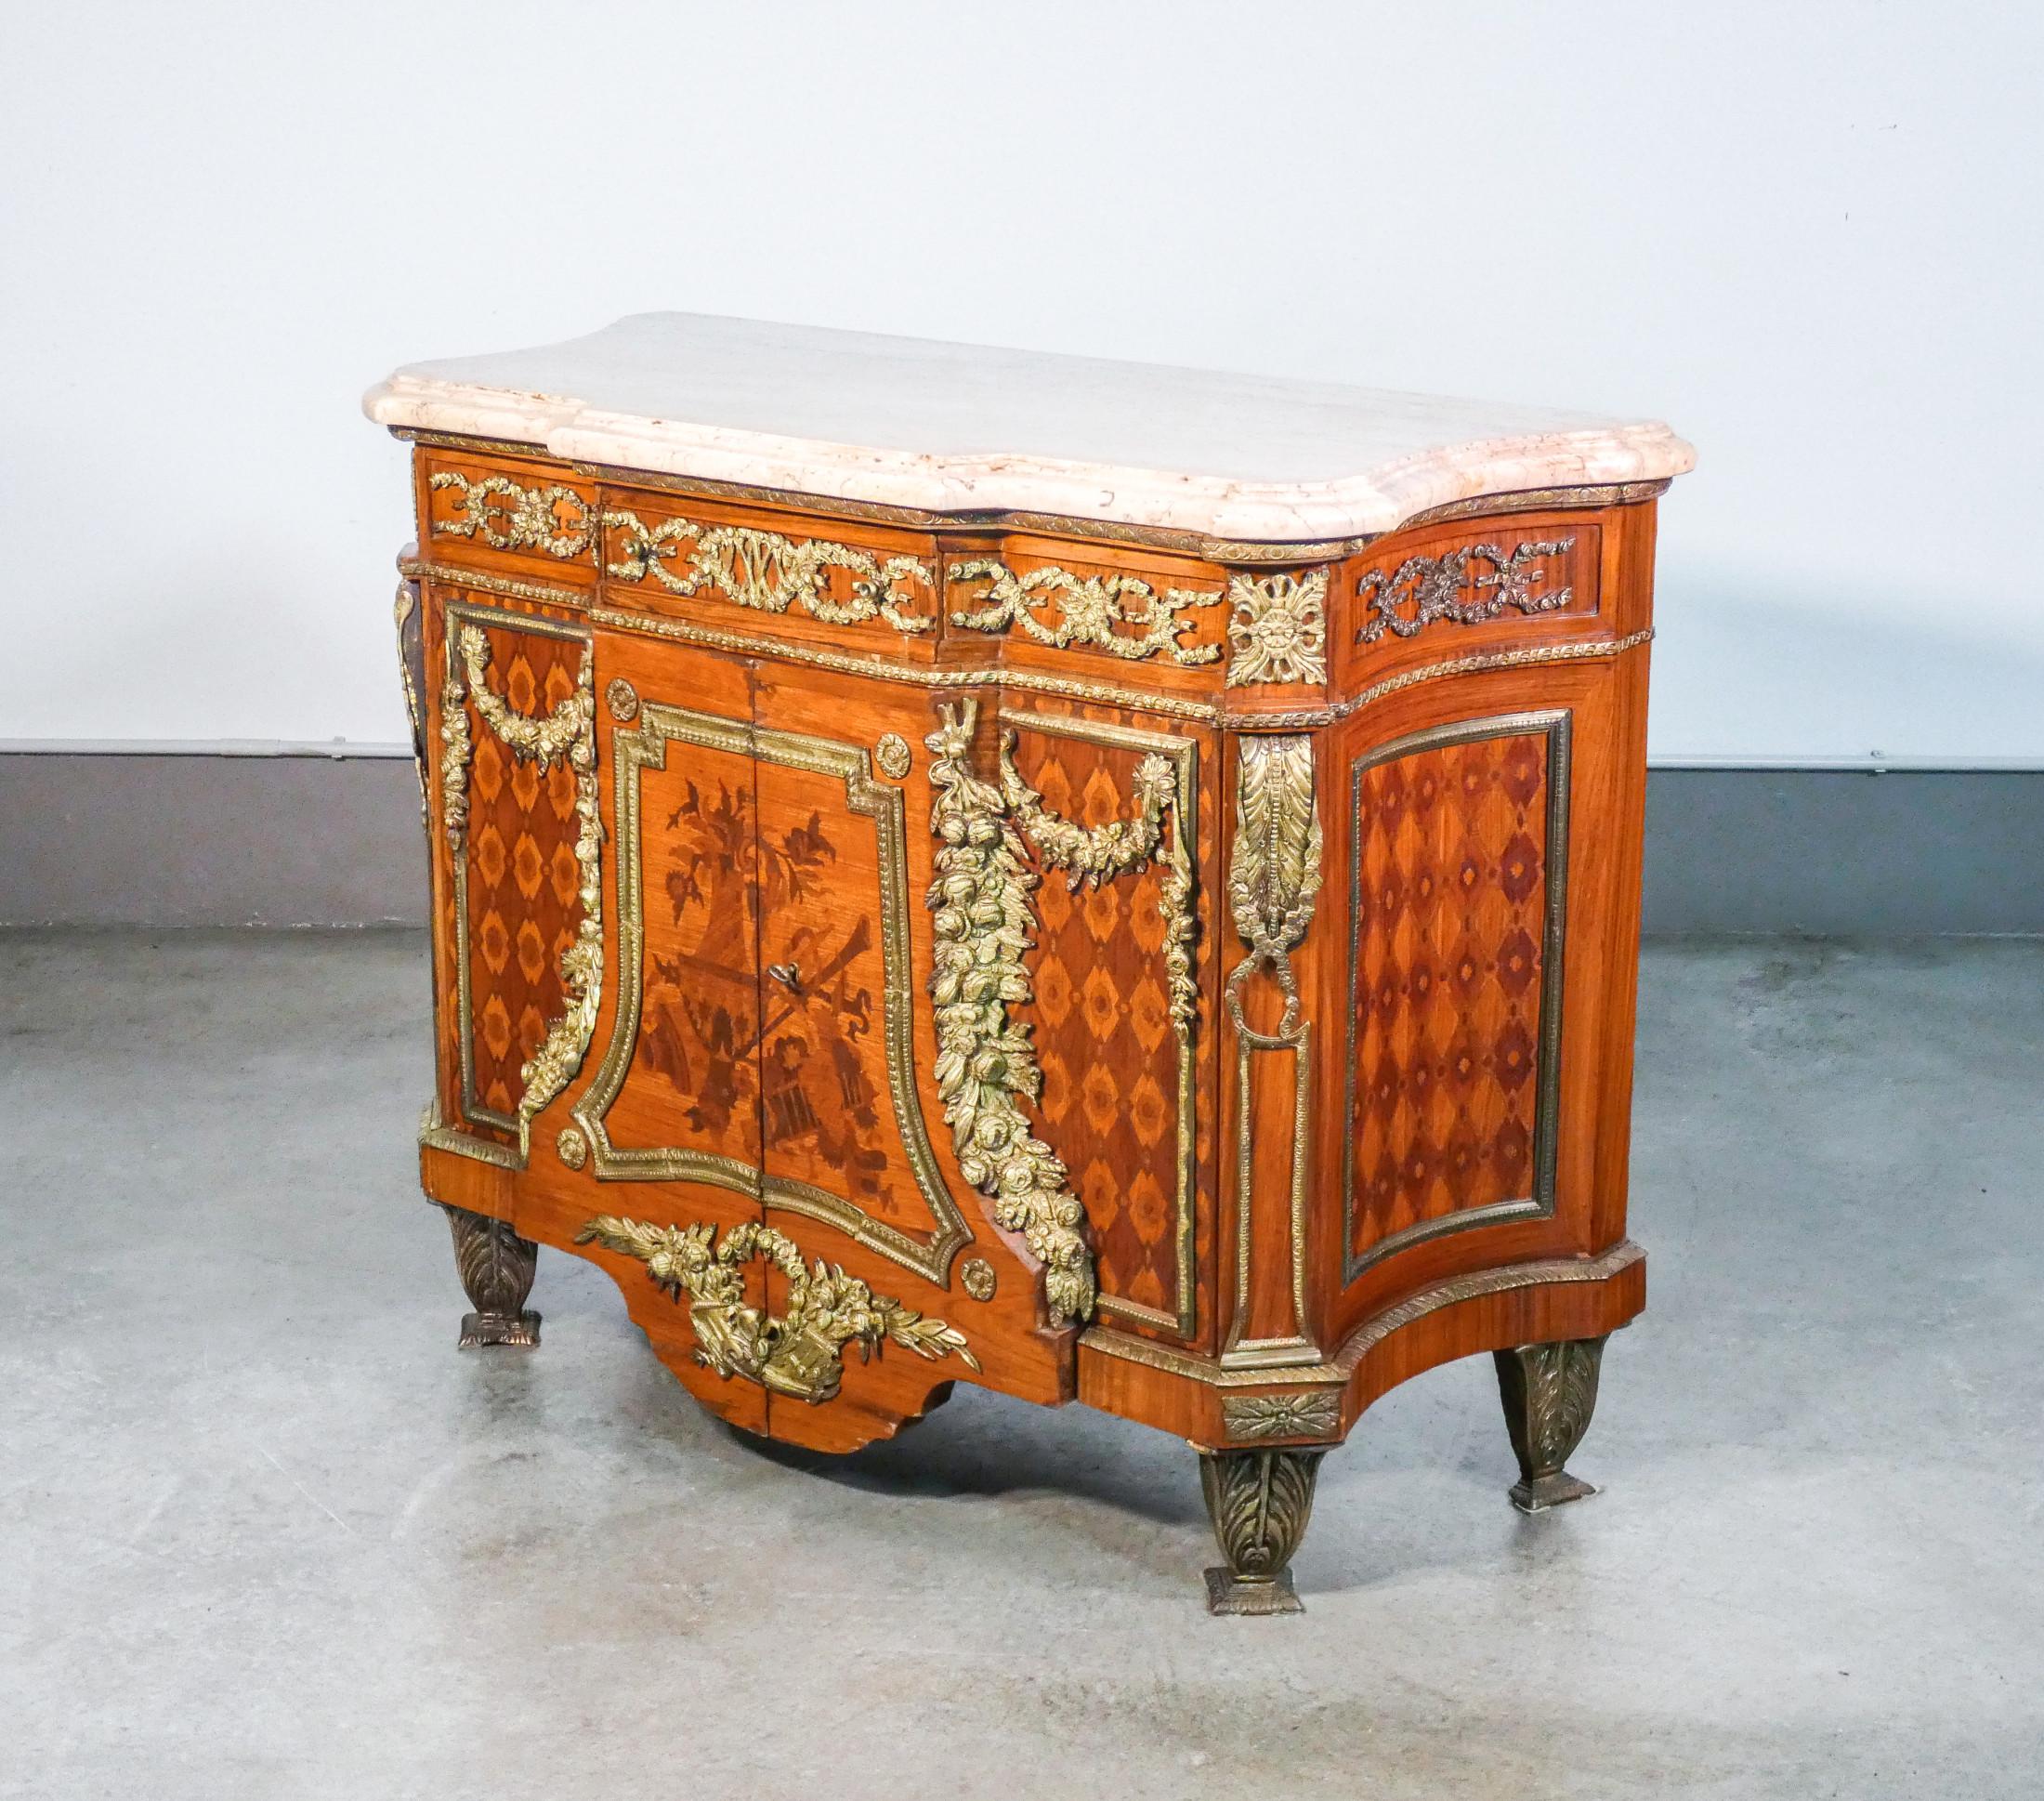 Commode in
Louis XV / Transition
style on the original model made
by Jean H. RIESNER.
Inlaid wood and bronze

Period
Early twentieth century

Model
Sideboard based on the original model by Jean Henri RIESNER

Materials
Inlaid wood